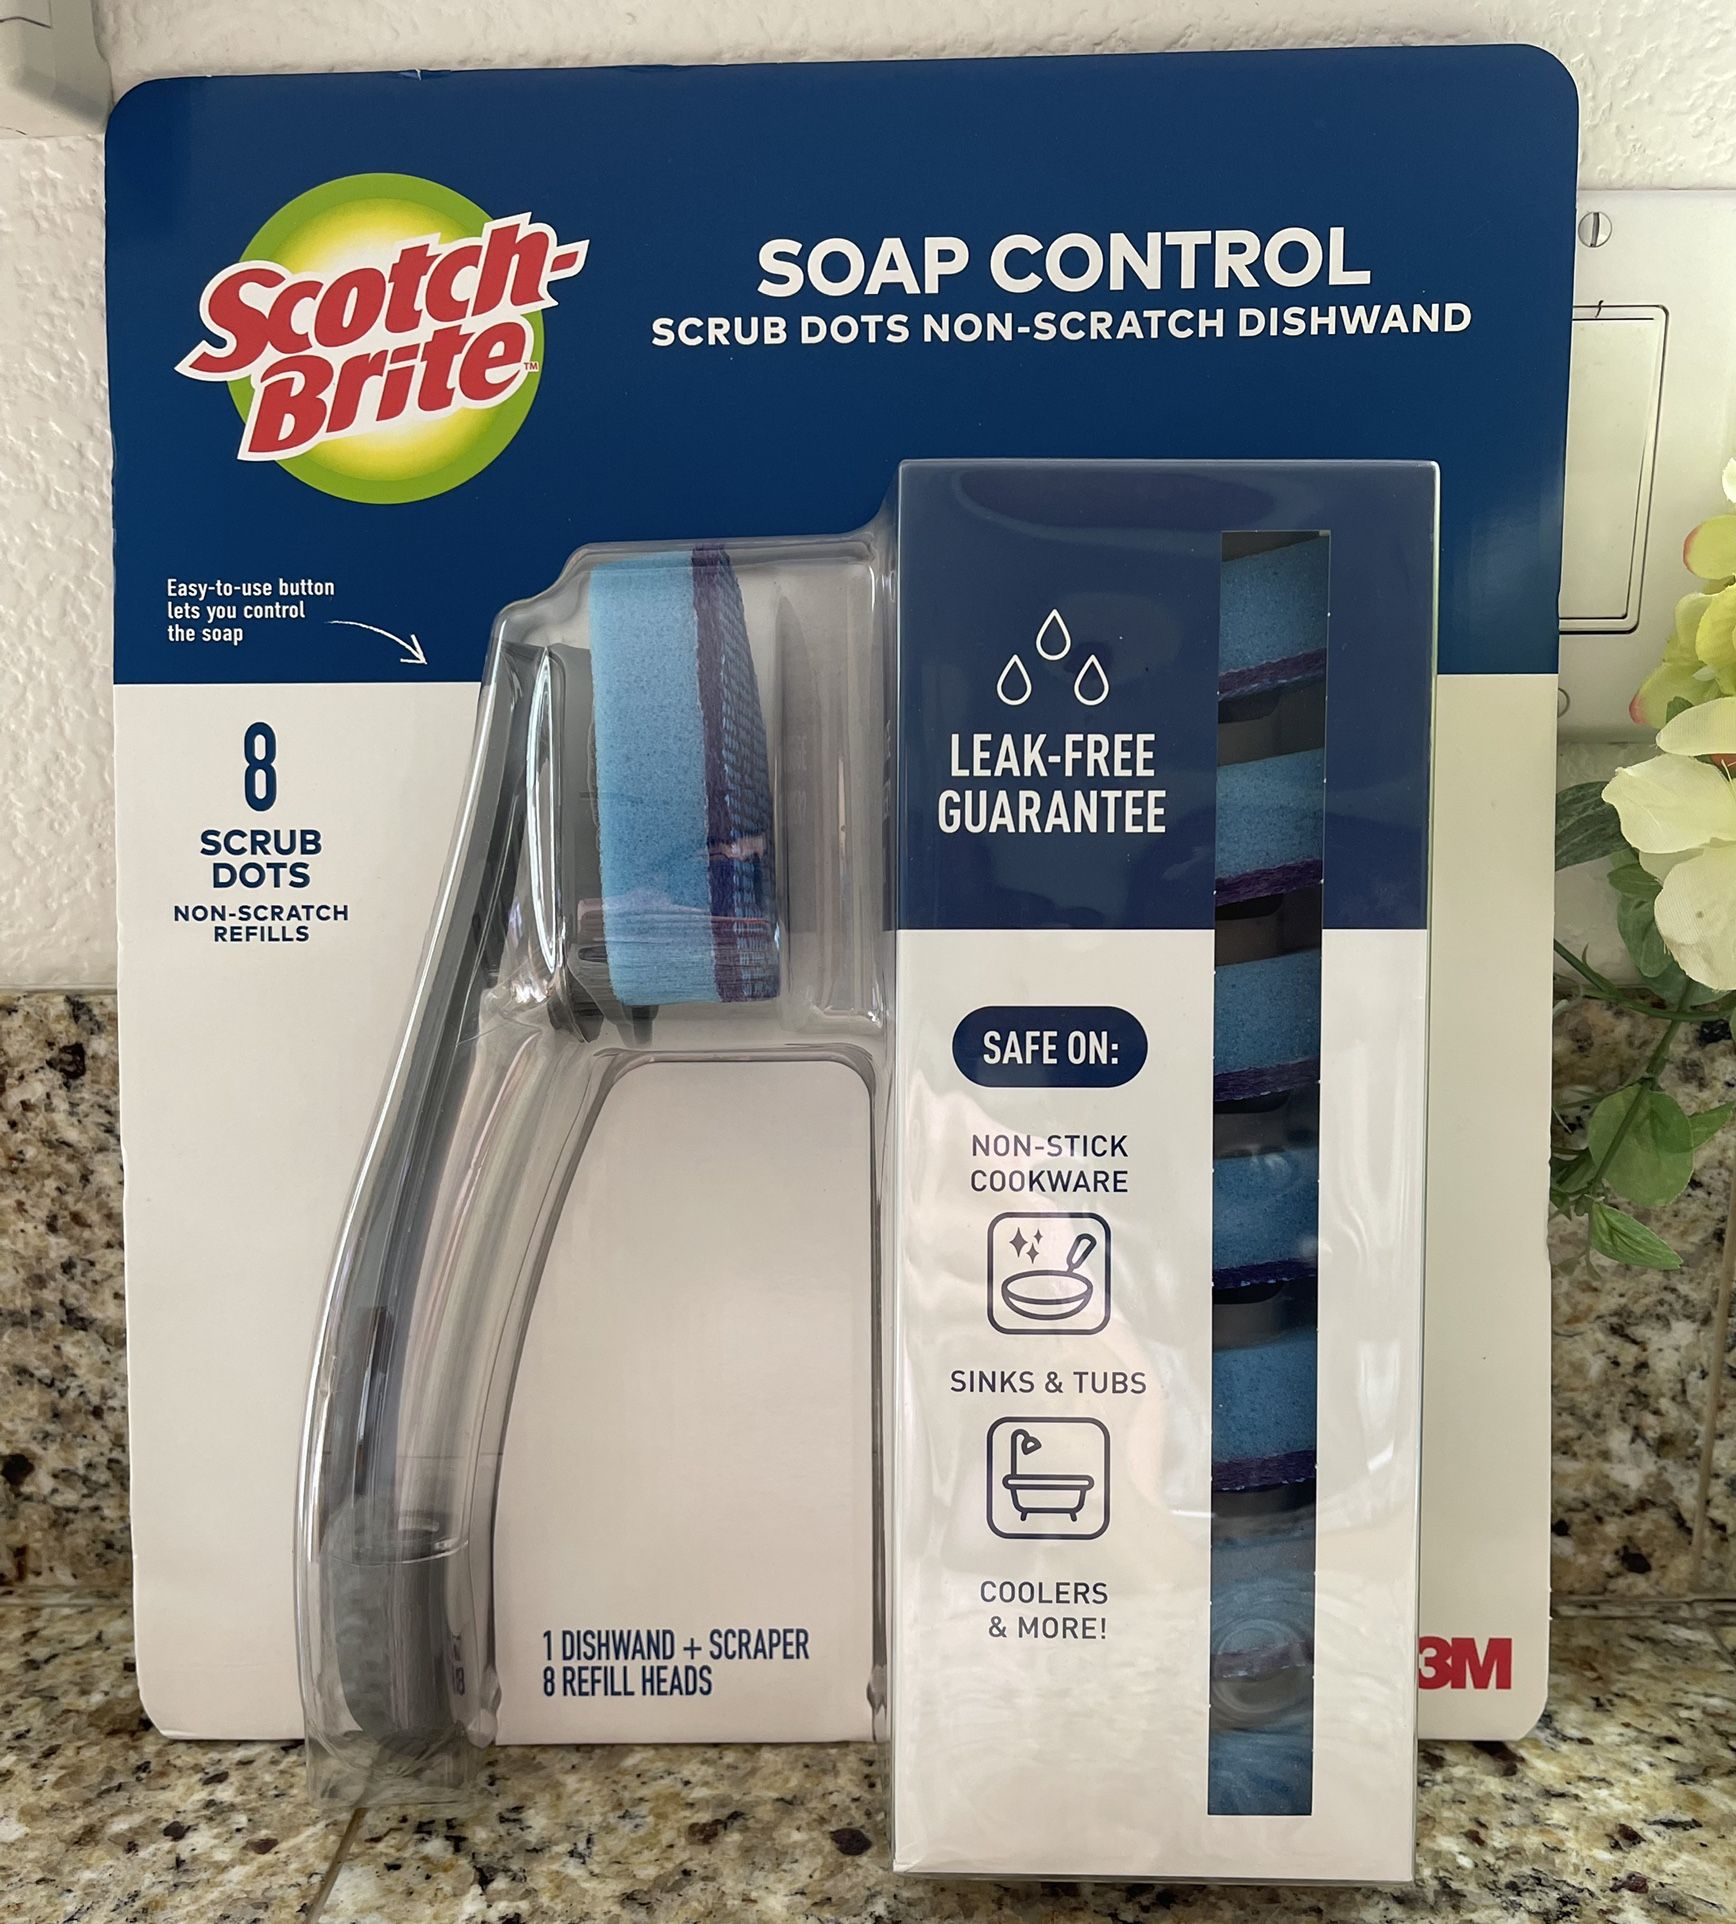 New  Scotch Brite Advance Soap Control Dishwand With 8 Non Scratch Refills Kitchen |Bathroom |Coolers 